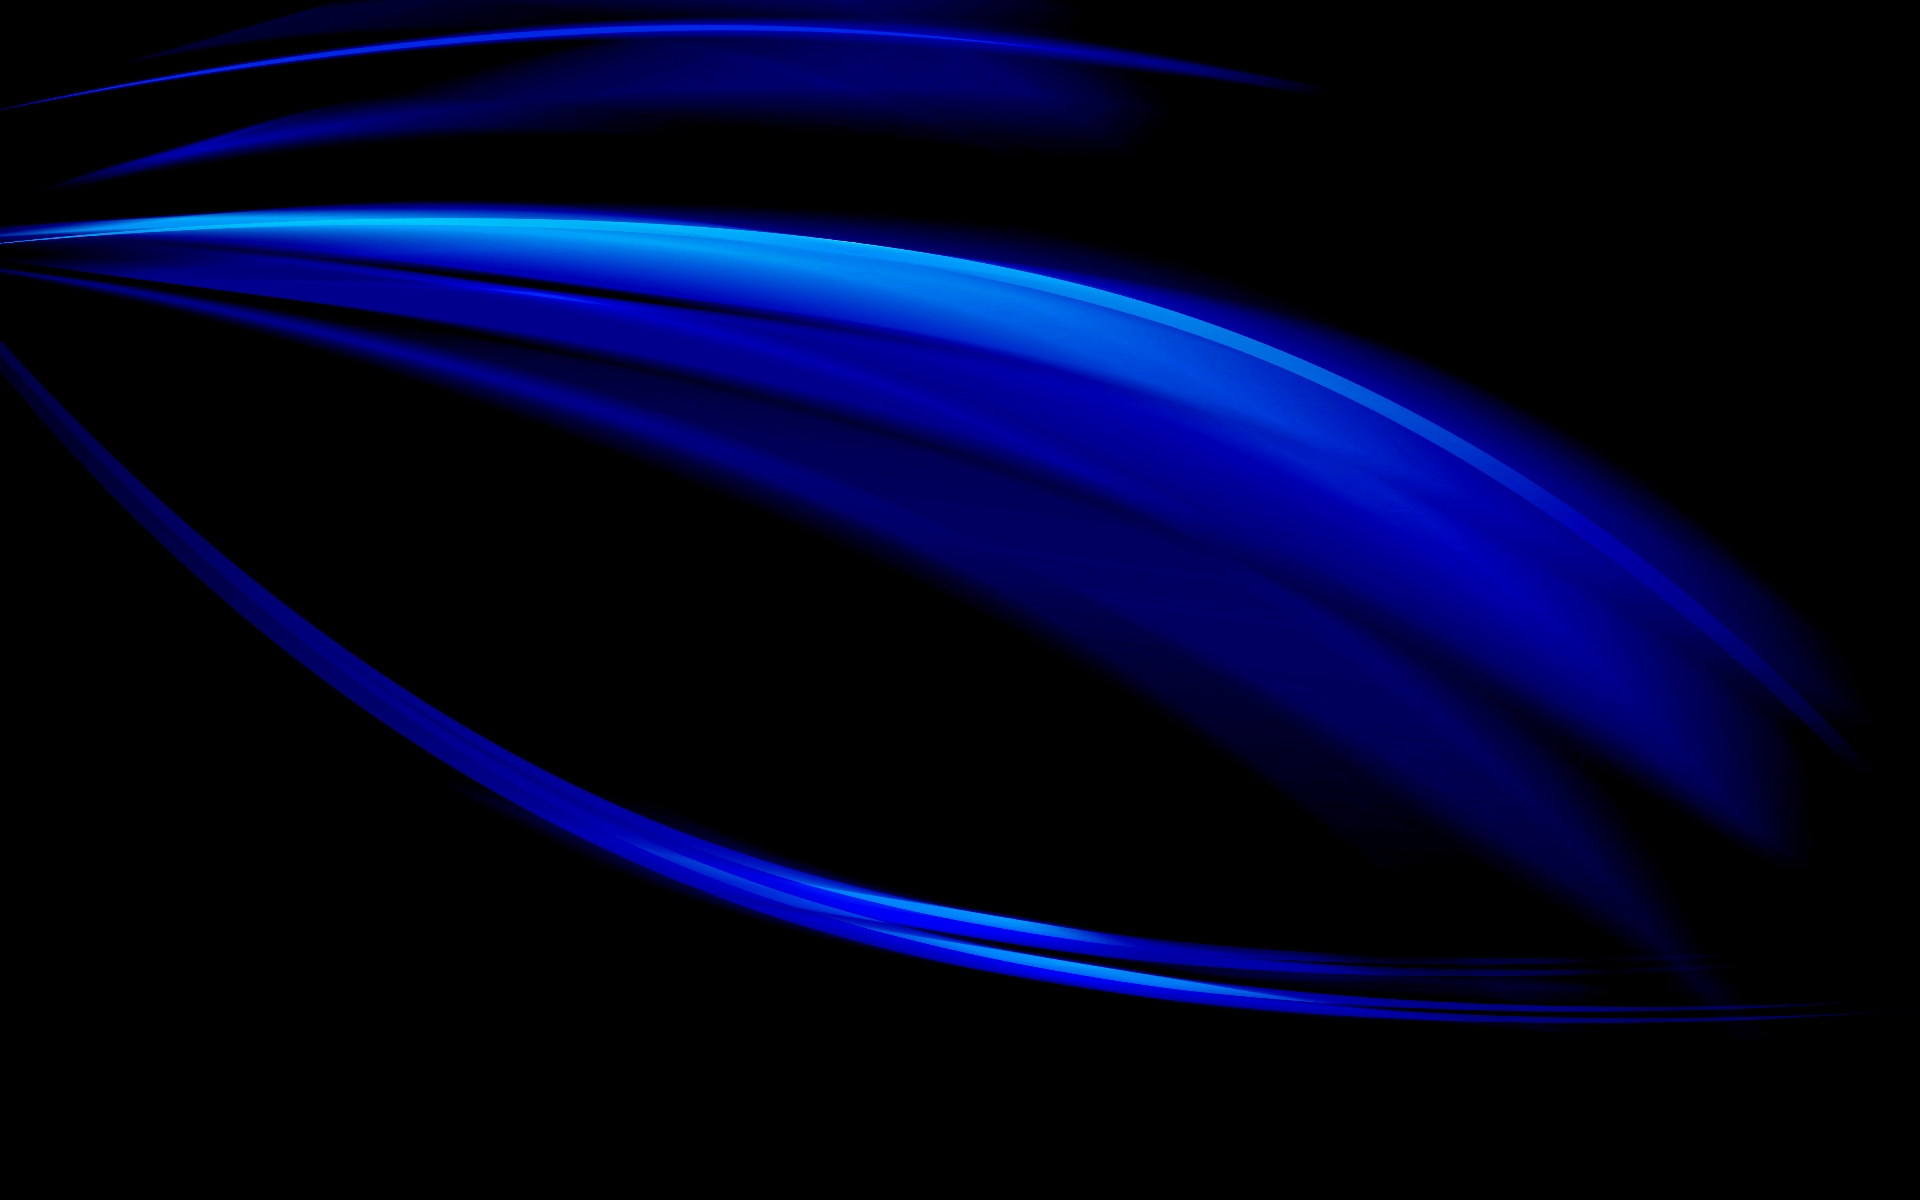 Black and Blue Abstract Wallpaper PC 1254   HD Wallpaper Site